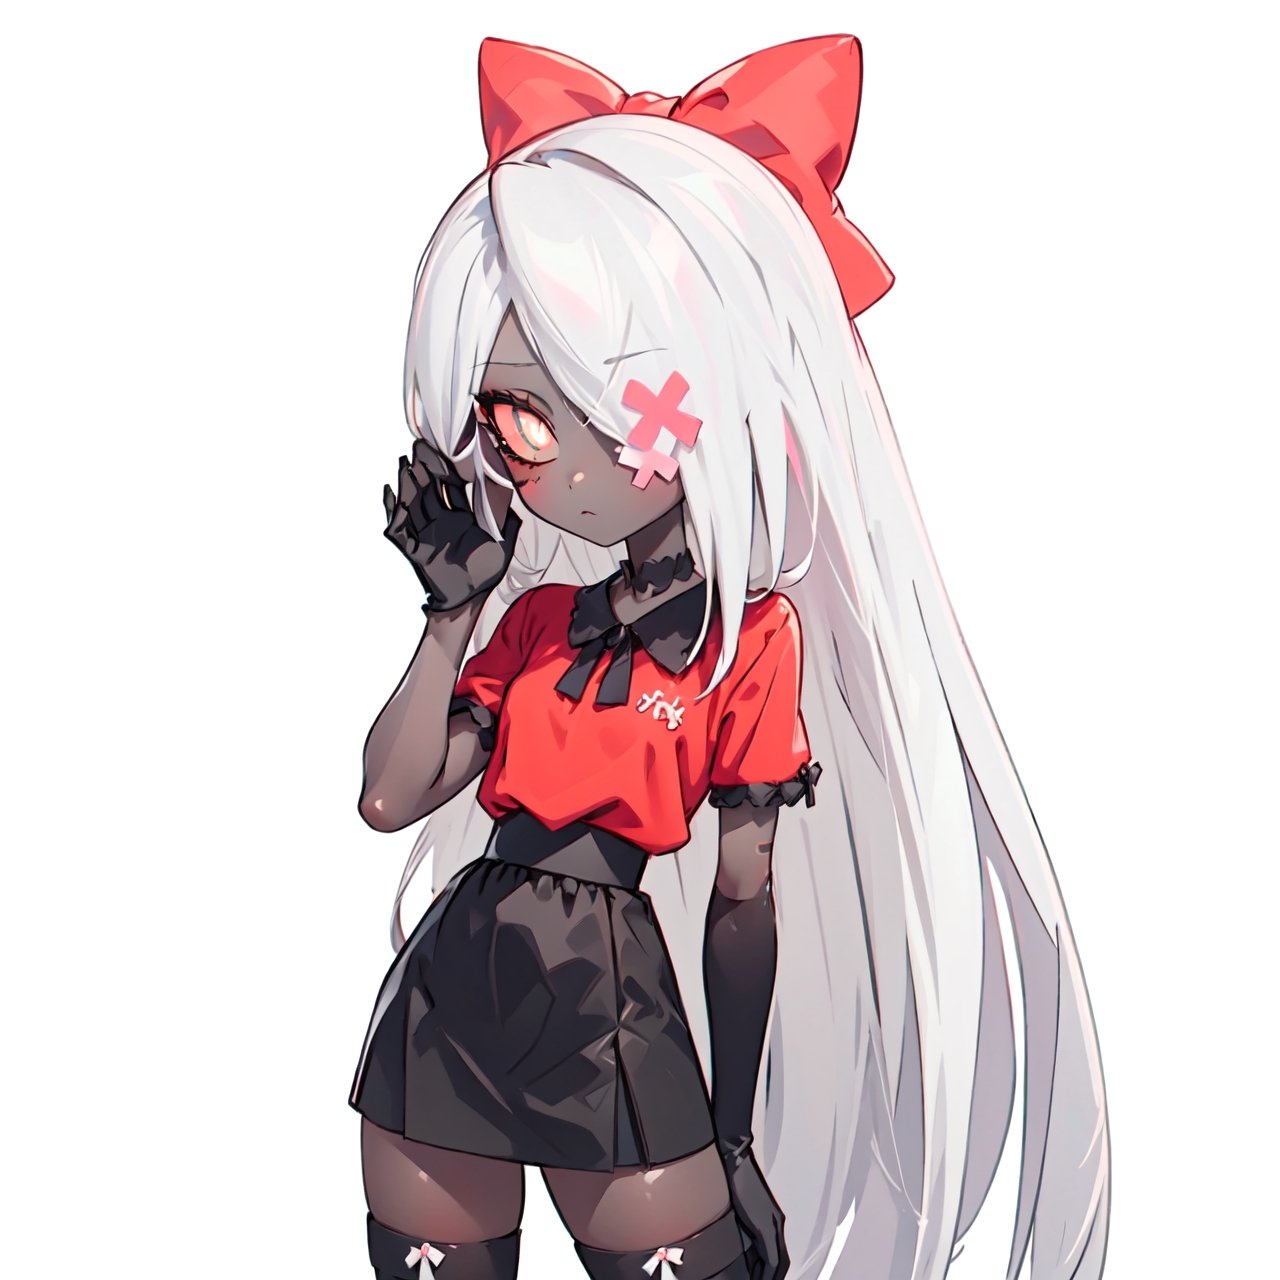 (Vaggie:1.0), (Hotel Outfit), (red shirt, black skirt, stockings, gloves, hair bow), (pastel-pink sclera, black pupil, grey skin, white hair, long hair, hair bow:1.2), (white background:1.5), (realistic:1.2), (masterpiece:1.2), (full-body-shot:1),(Cowboy-shot:1.2), neon lighting, dark romantic lighting, (highly detailed:1.2),(detailed face:1.2), (gradients), colorful, detailed eyes, (detailed landscape:1.2), (natural lighting:1.2), (cute pose:1.2), (solo, one person, 1girl:1.5), standing,    